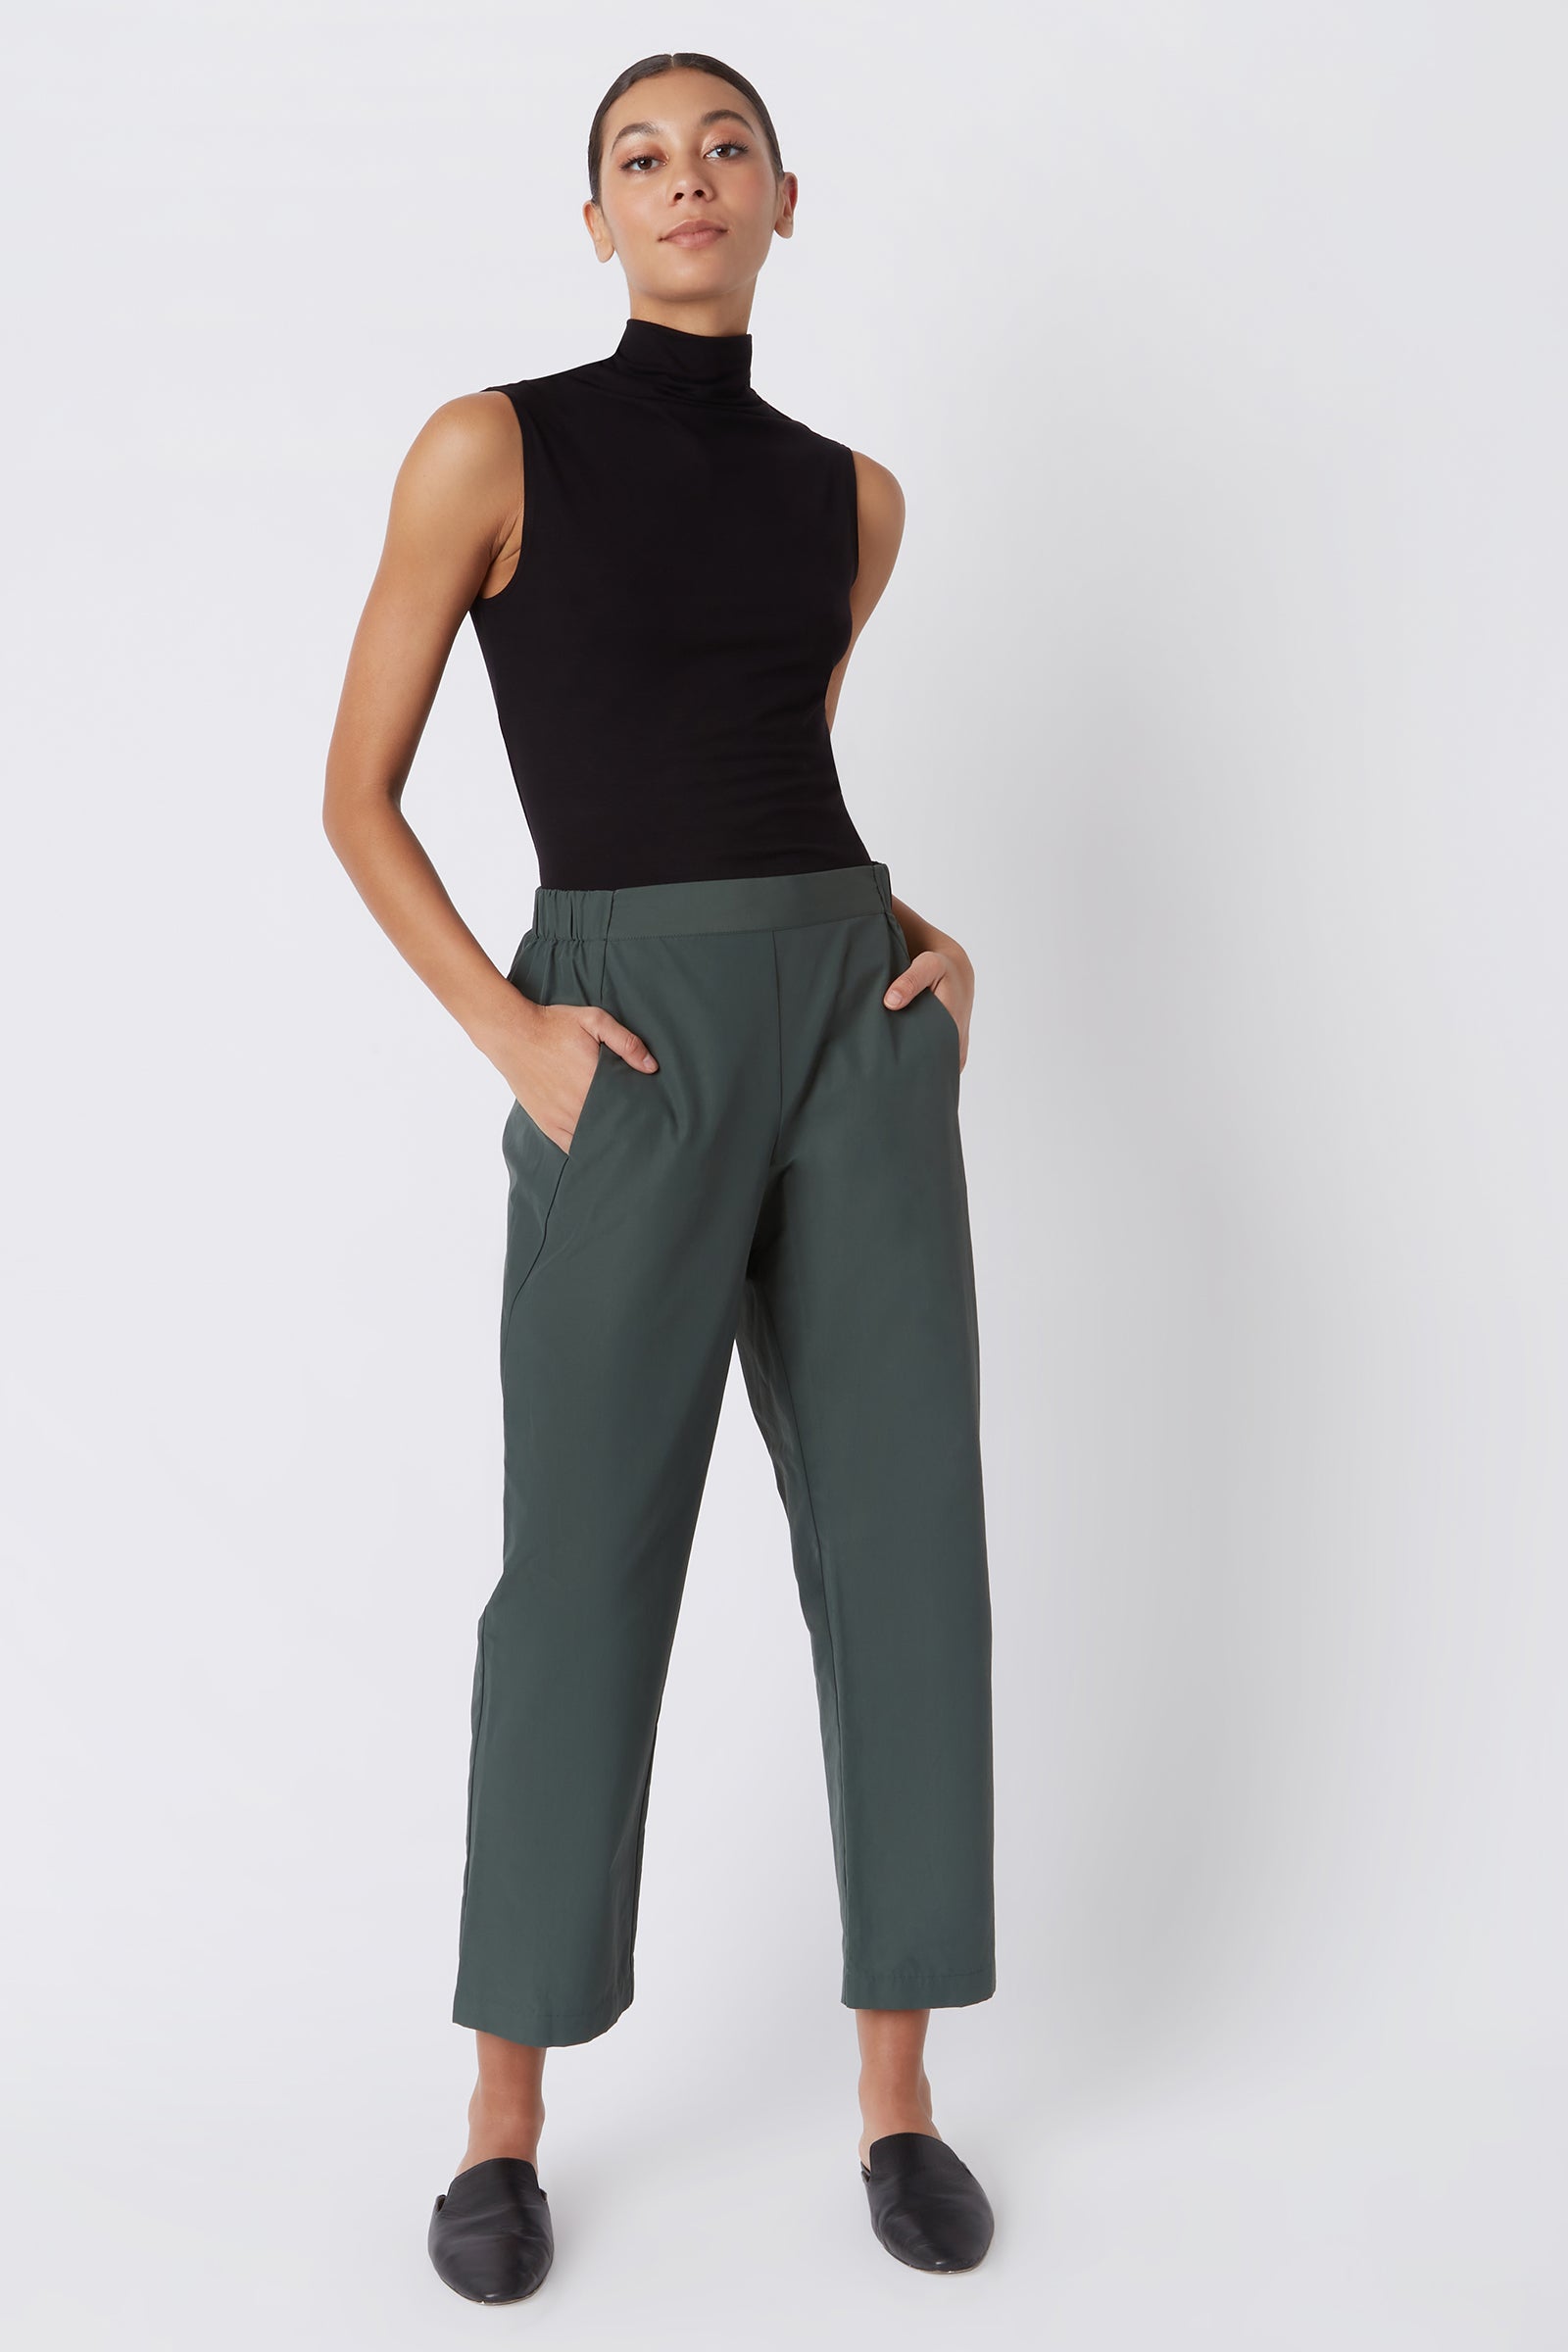 Kal Rieman Brit Crop Pant in Loden on Model with Hands in Pockets Full Front View